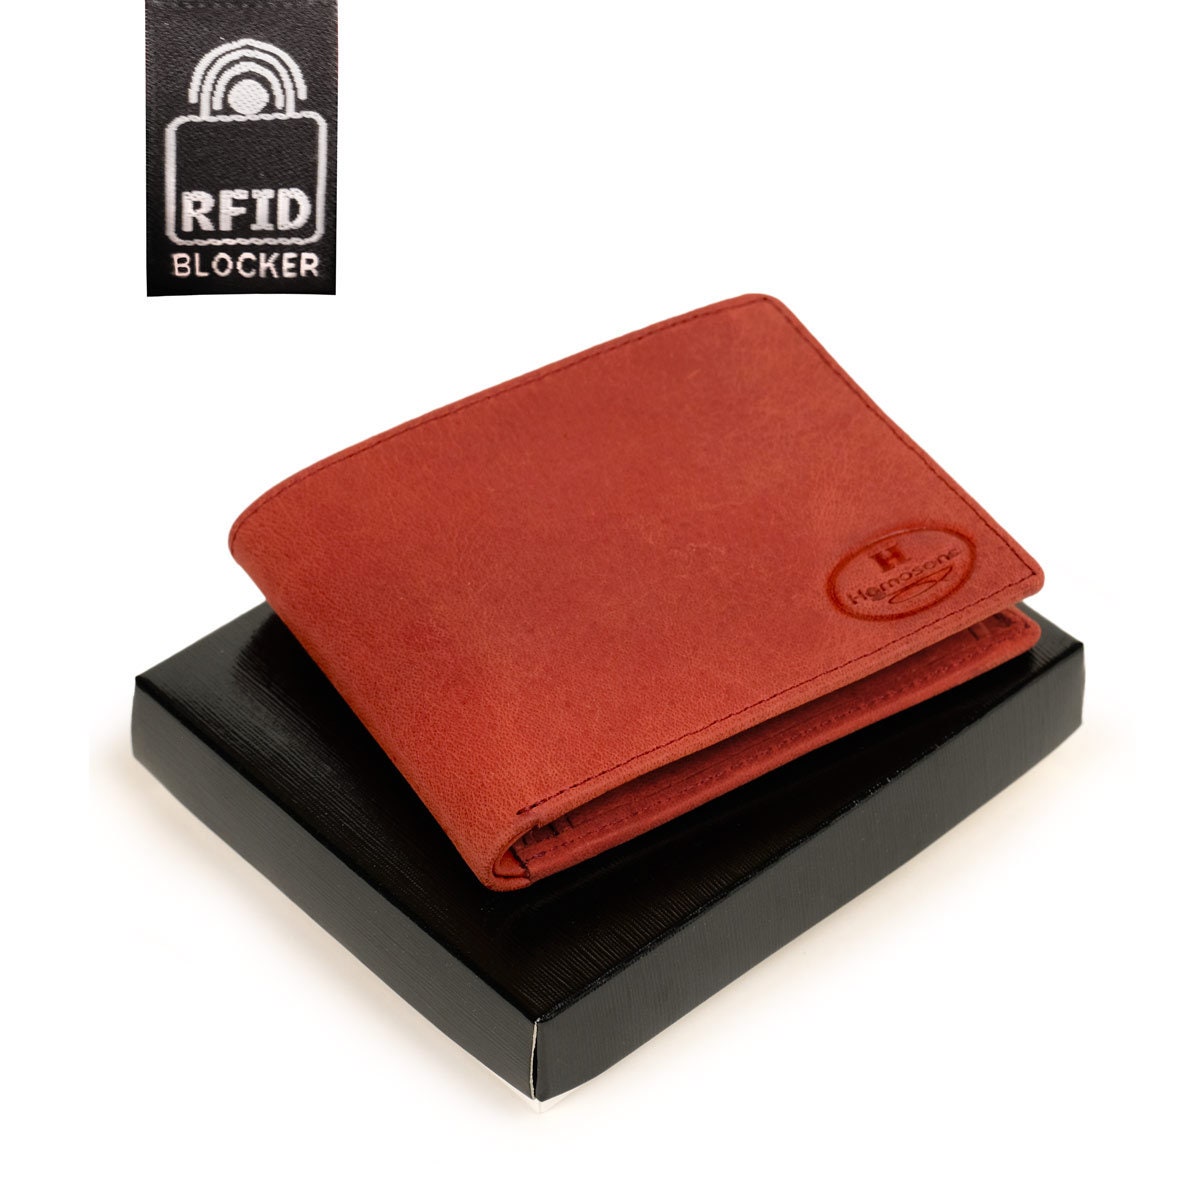 Slim Wallet / Thin Billfold for Men With RFID Protection, Horizontal